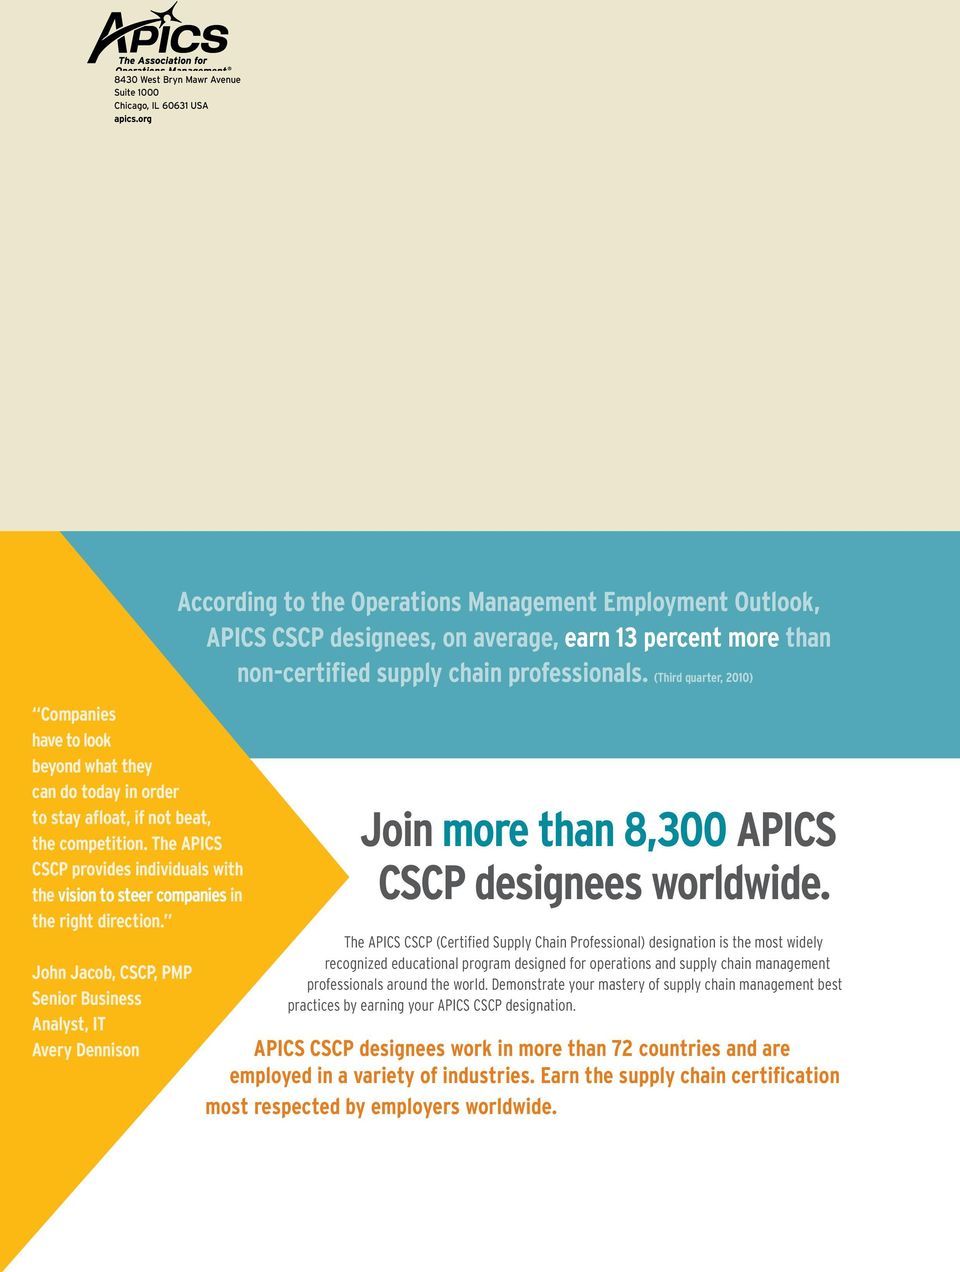 John Jacob, CSCP, PMP Senior Business Analyst, IT Avery Dennison According to the Operations Management Employment Outlook, APICS CSCP designees, on average, earn 13 percent more than non-certified